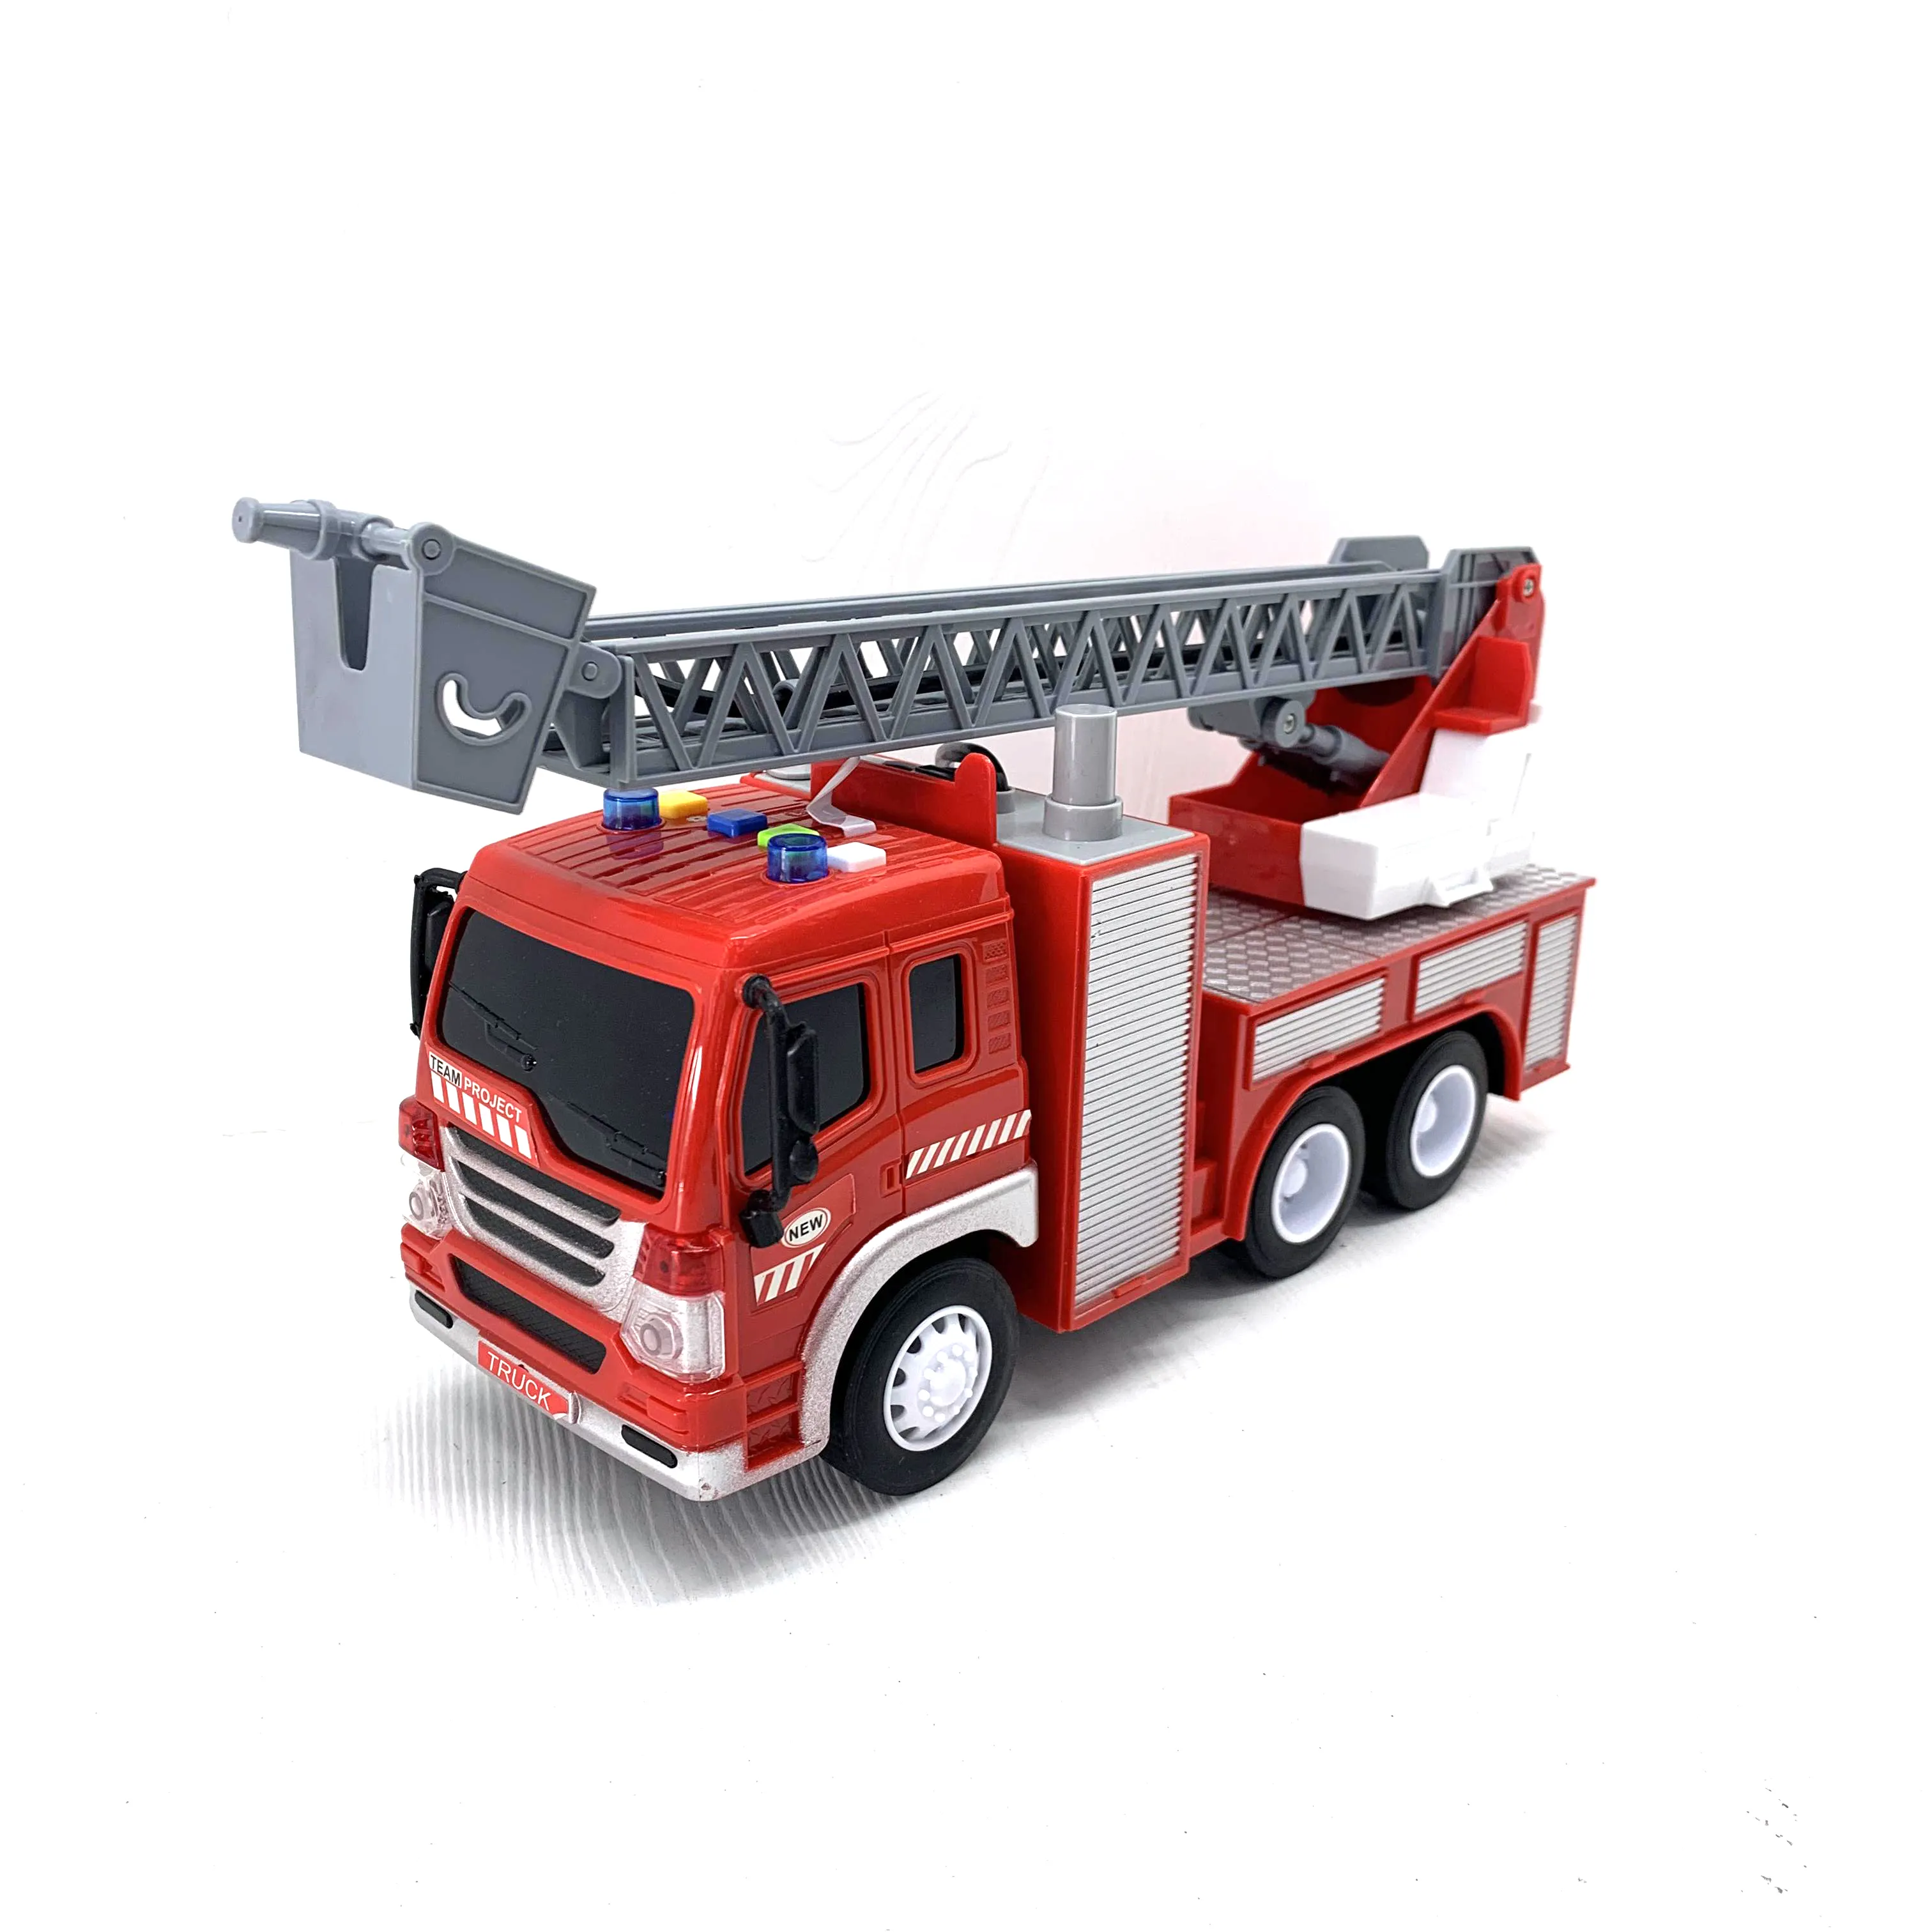 1/16 Highly Restored Model Friction Car City Fire Truck Toy for Kids , Water Spray Function, Light & Sound